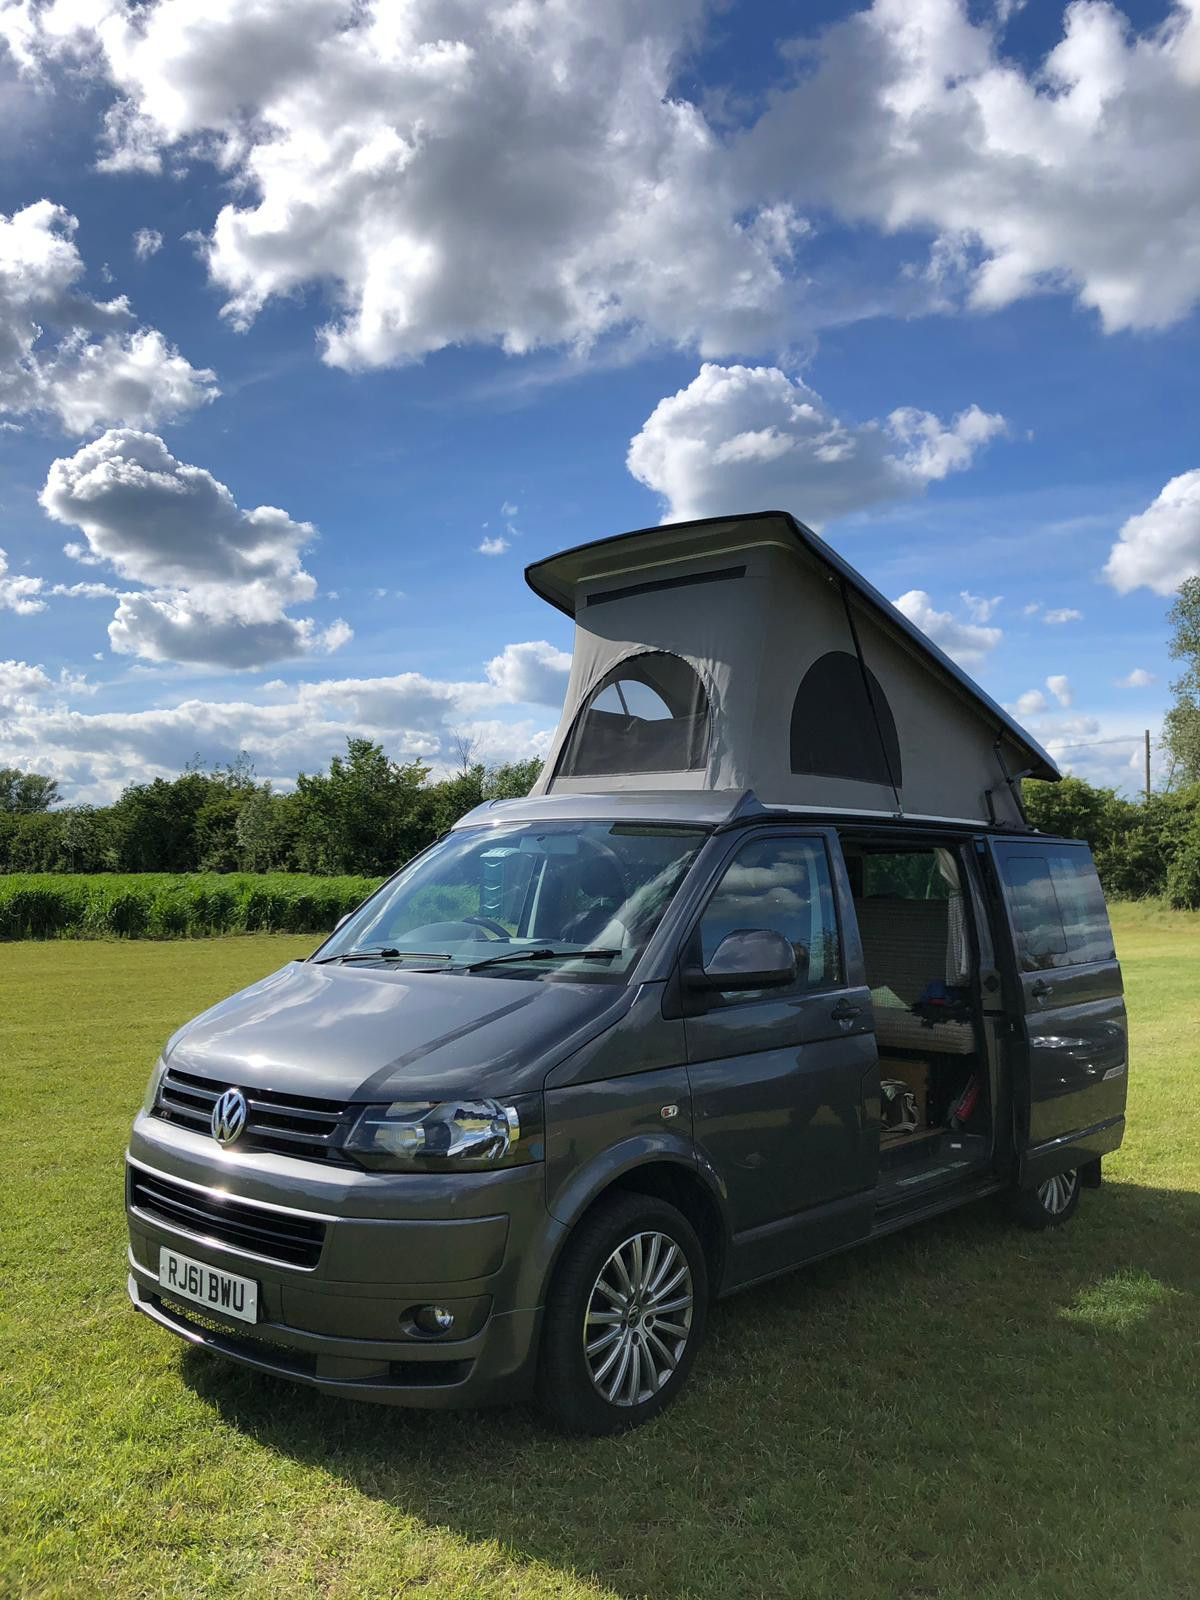 A VW T5 Campervan called Bubba and on-site, rood popped and setup in less than 5 minutes, ready to relax for hire in Surrey, England